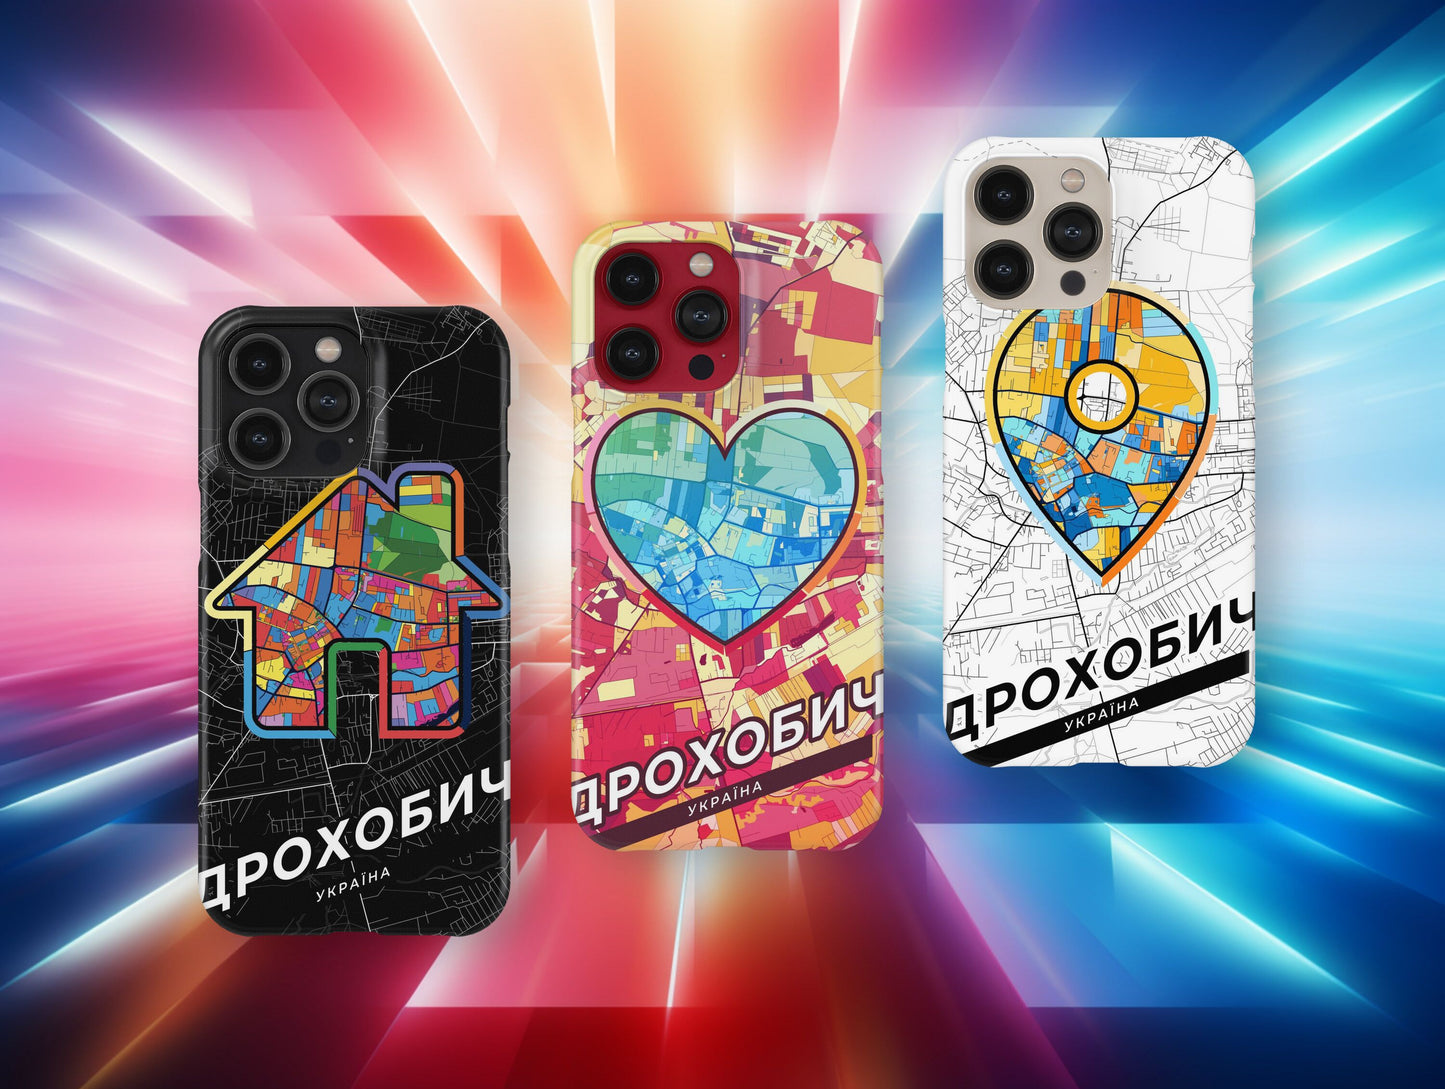 Drohobych Ukraine slim phone case with colorful icon. Birthday, wedding or housewarming gift. Couple match cases.